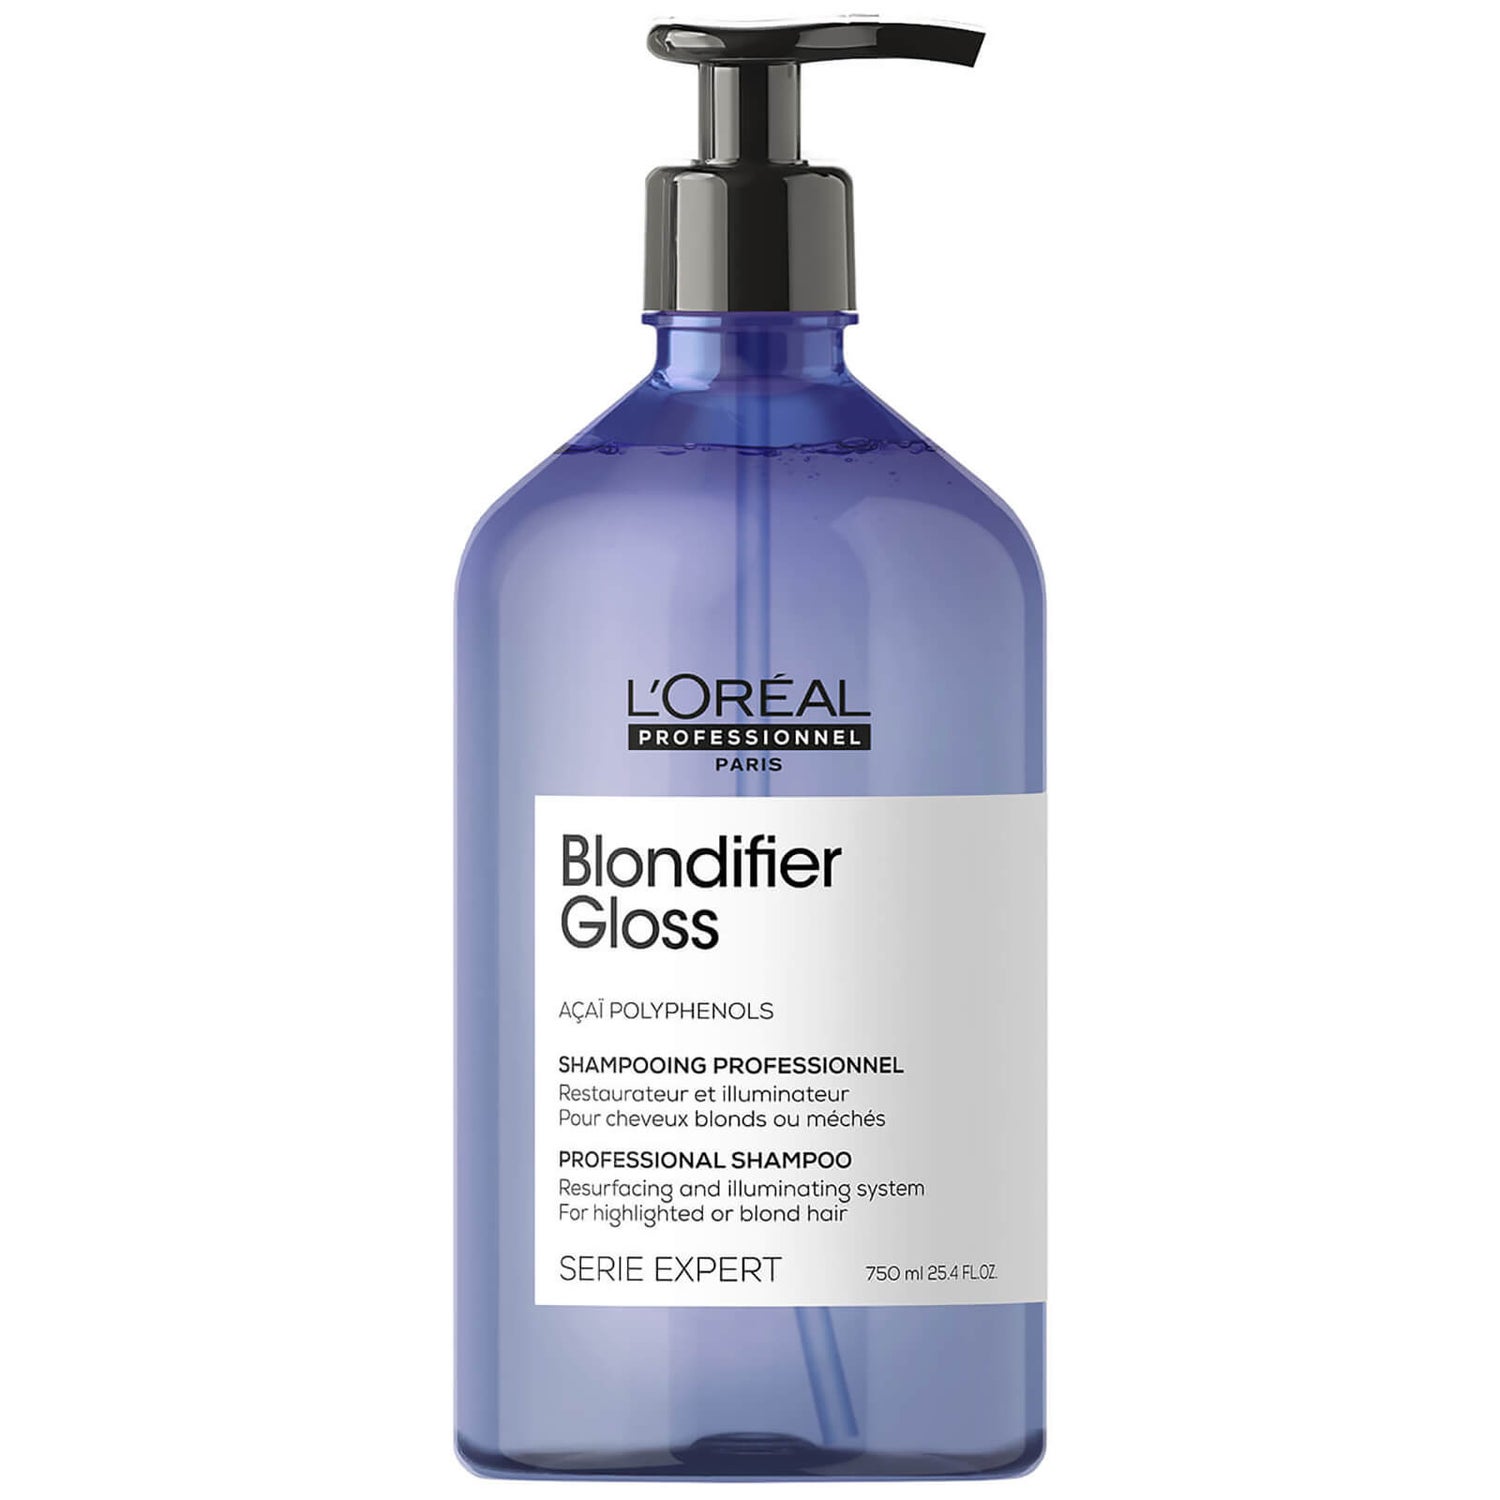 Shampoo Serie Expert Blondifier Gloss for Highlighted or Blonde Hair 7L’Oréal Professionnel 750ml